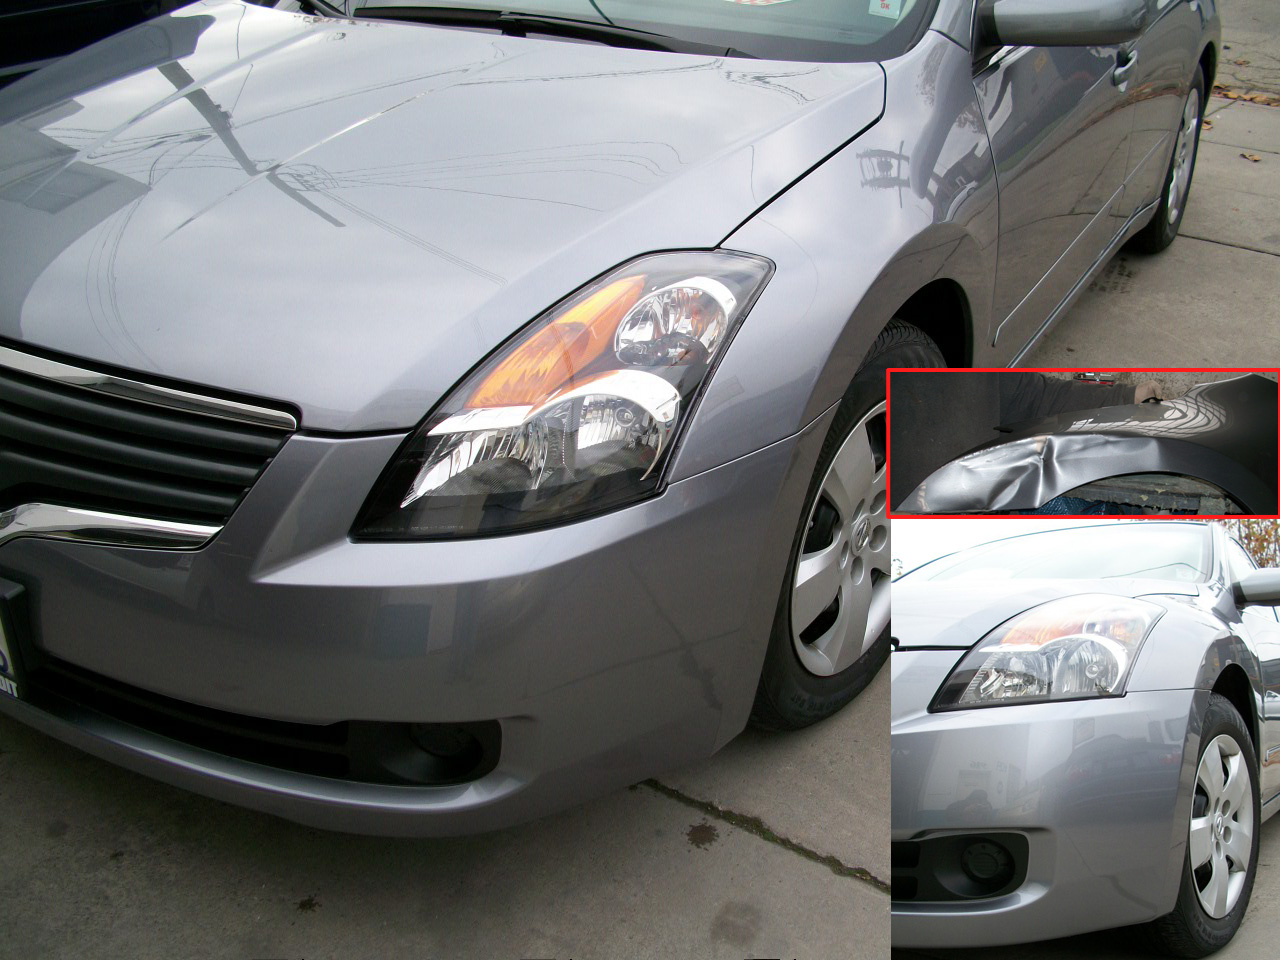 Five Star auto body collision repair: bumber, fender, and head lamp were repaired on this beautiful 2008 Nissan Altima